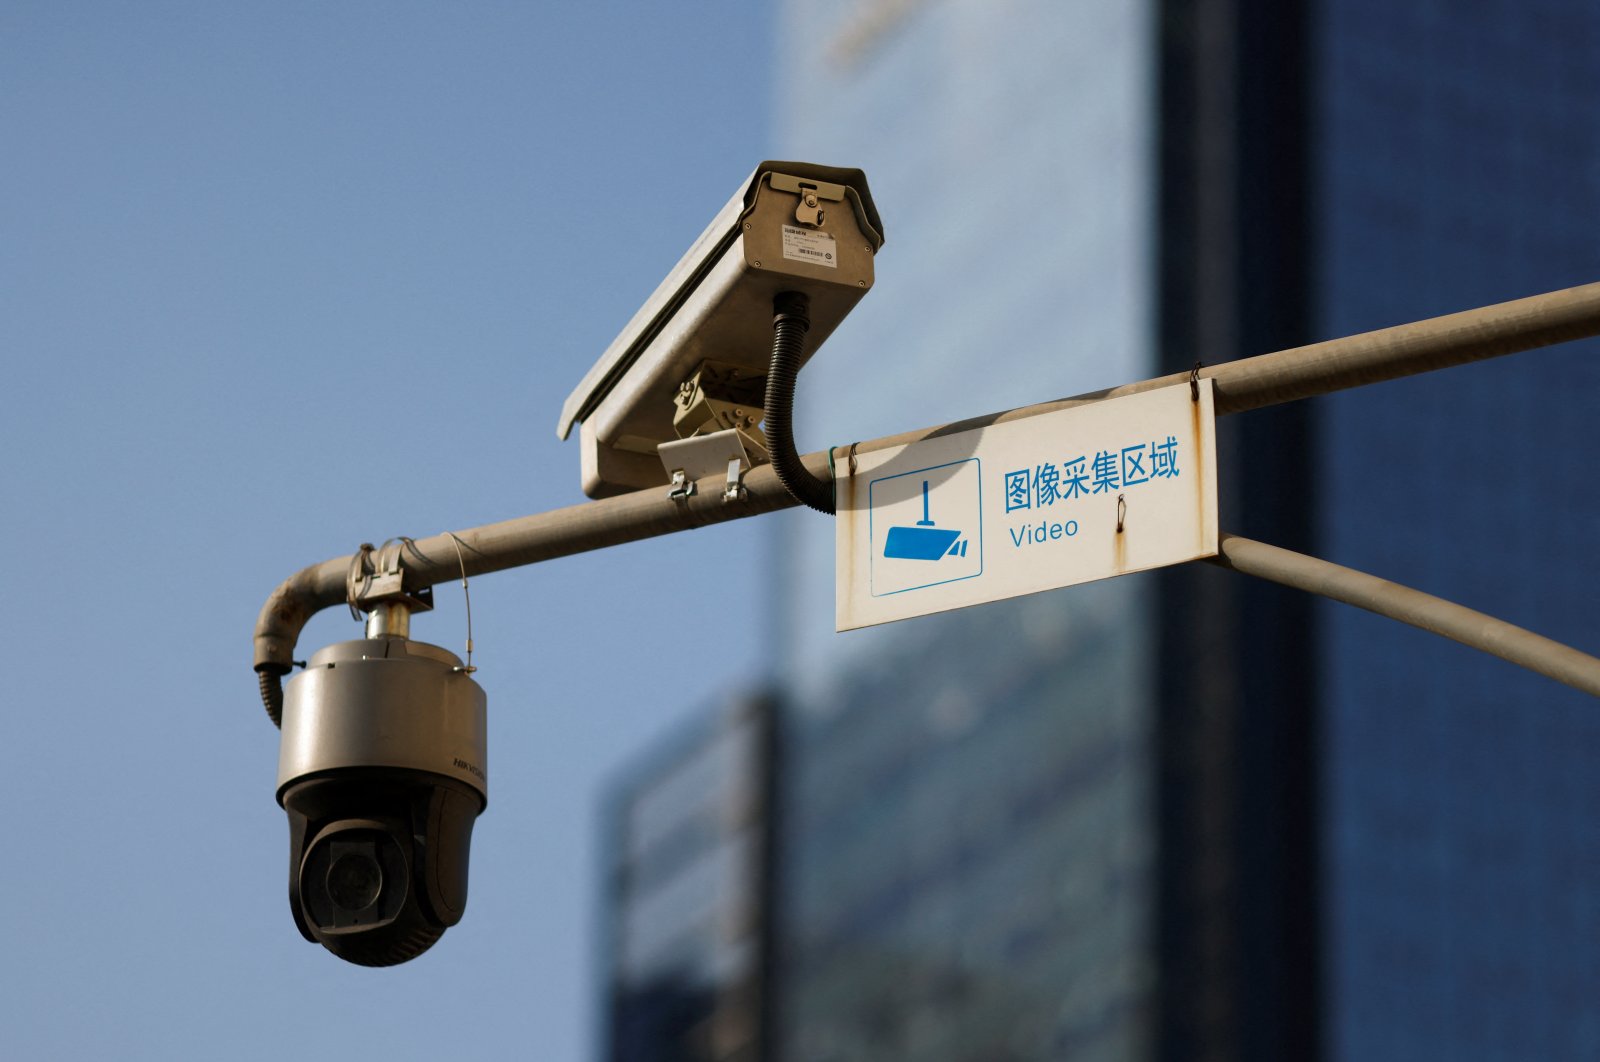 A video surveillance sign is seen next to Hikvision surveillance cameras overlooking a street in Beijing, China, Dec.14, 2021. (Reuters Photo)